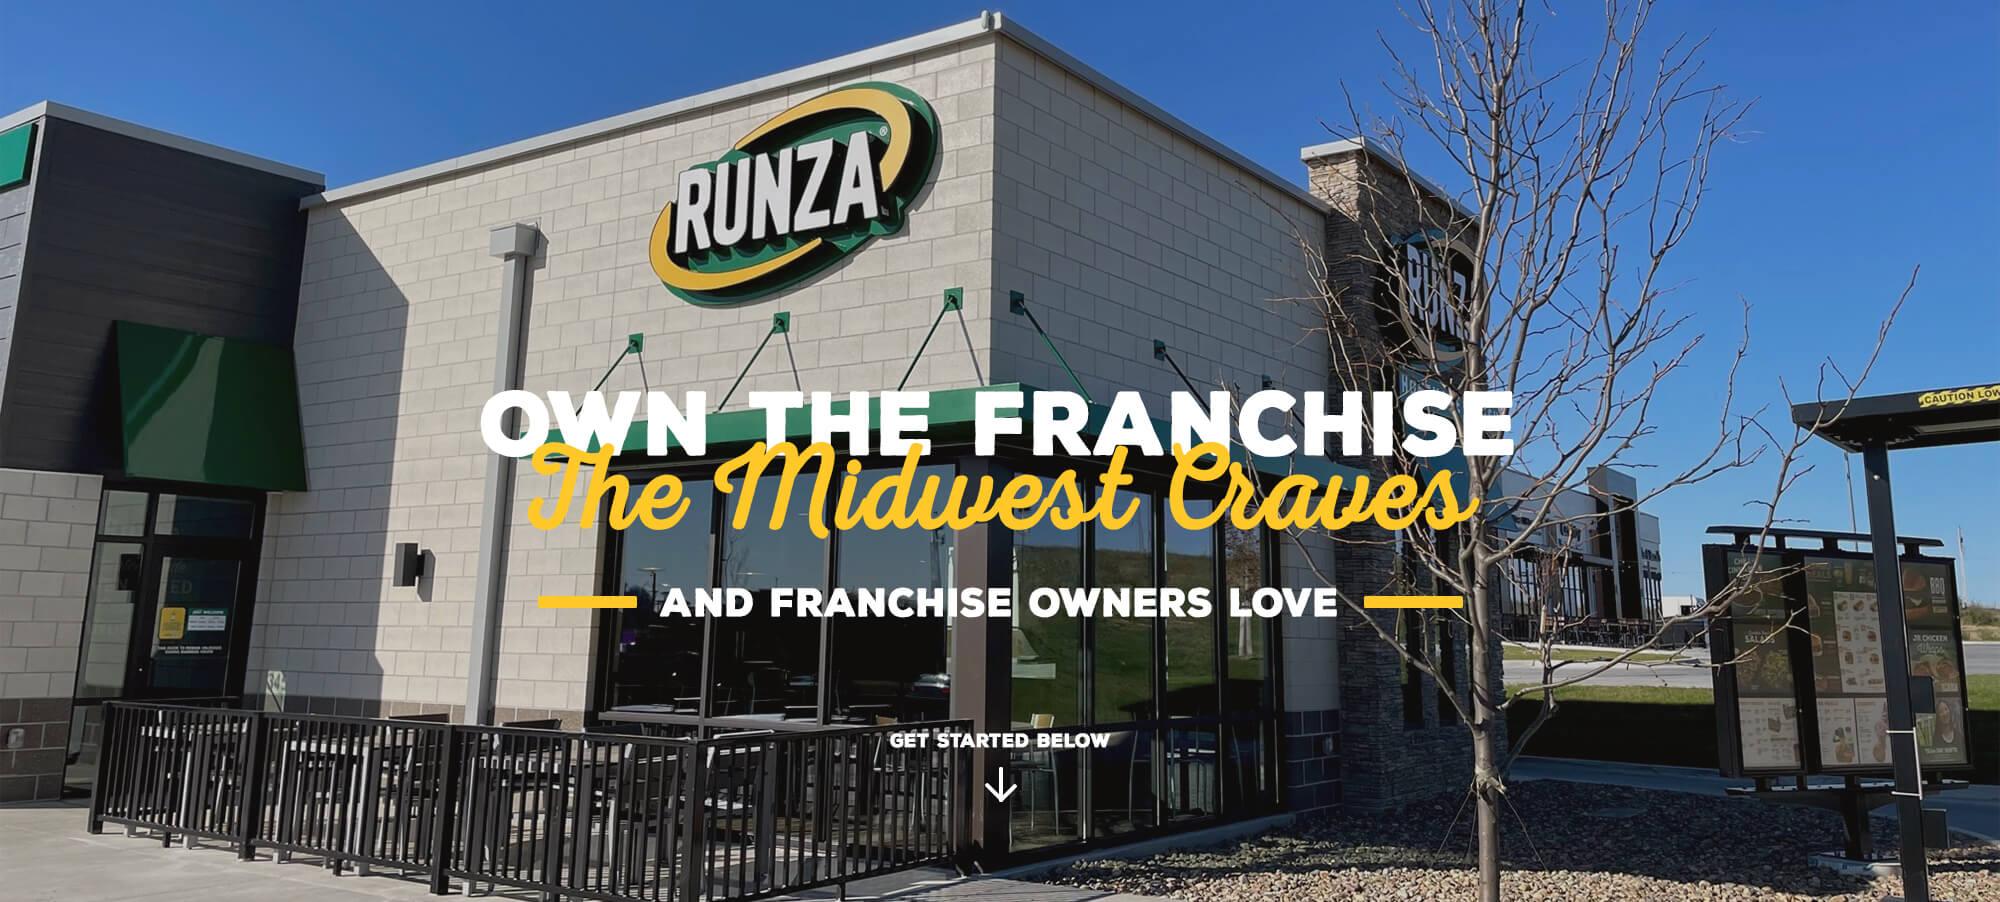 Own the franchise the Midwest craves. Get started below.